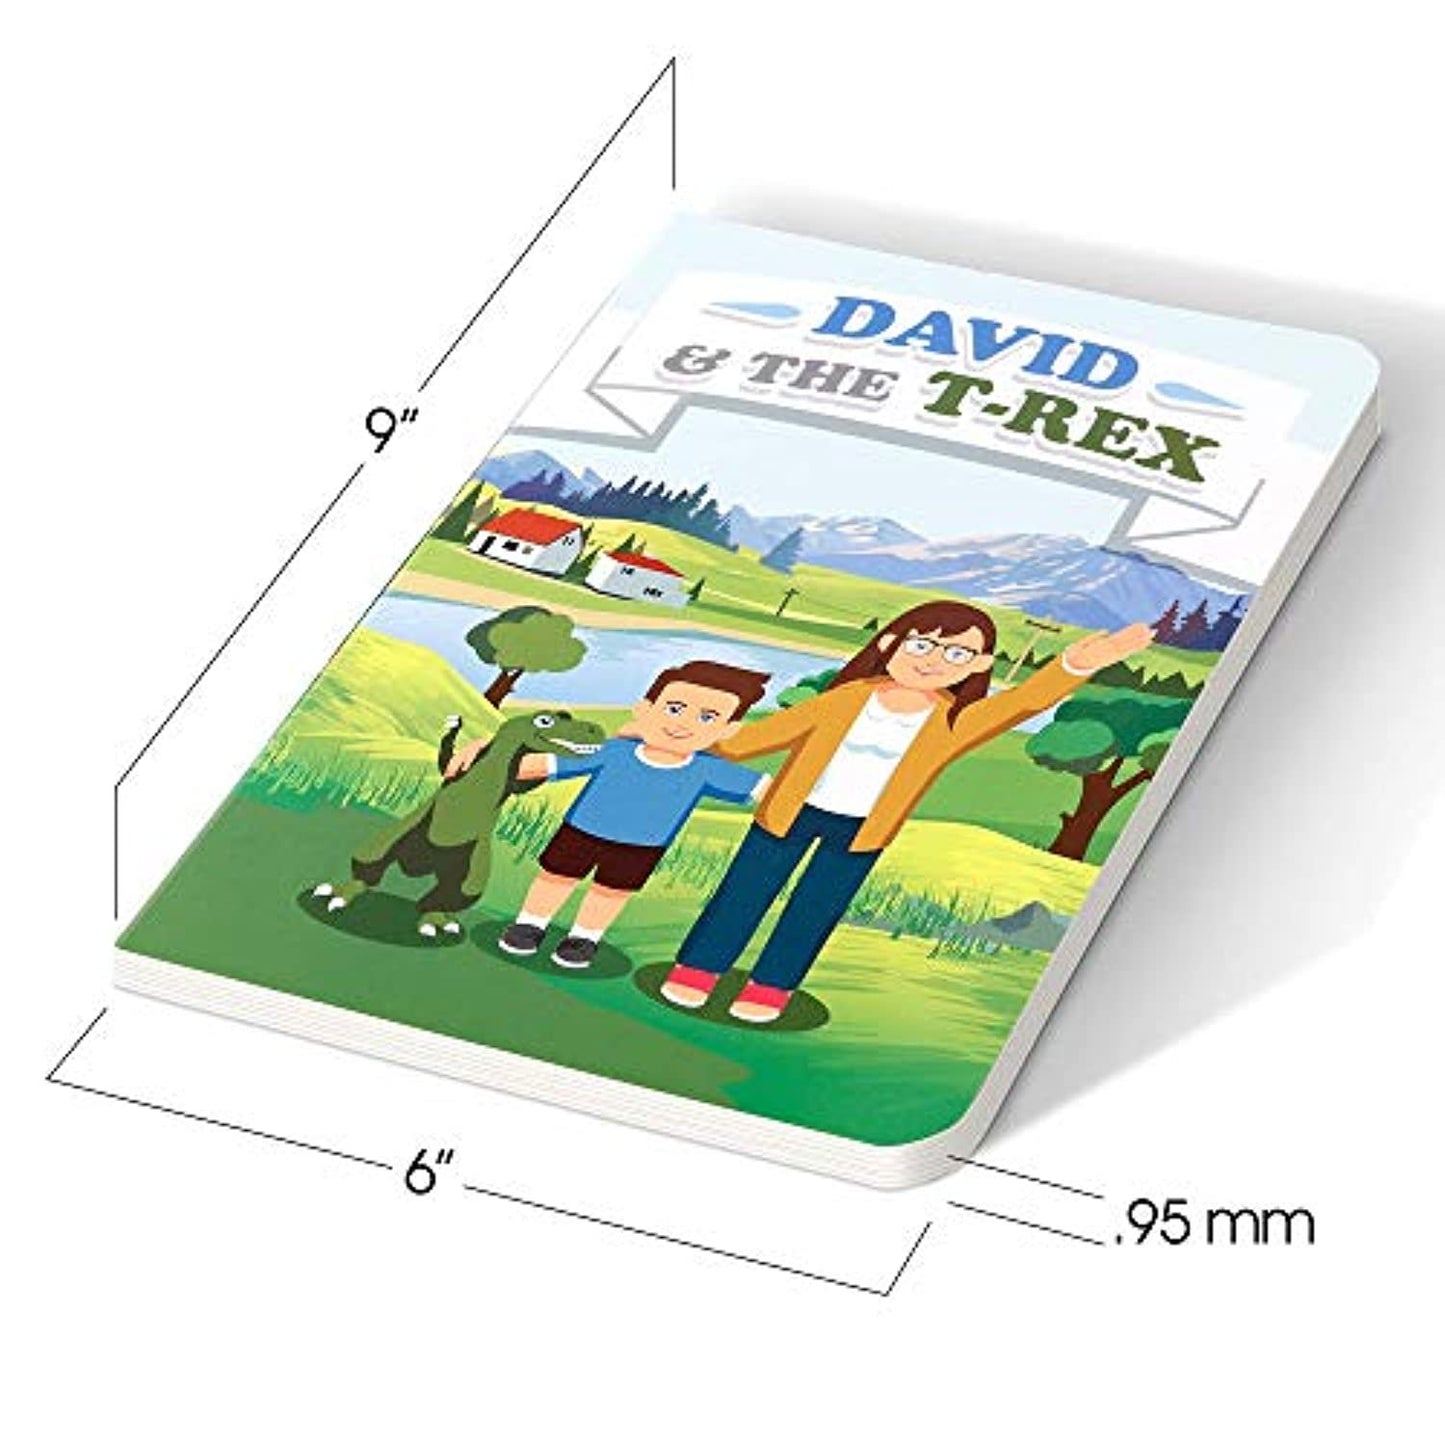 ArtCreativity Educational Book for Kids | David and the T-Rex | Fun Children’s Learning Book About the Environment | Full Color Illustrations | Great Gift Idea for Preschool Boys, Girls, Toddlers